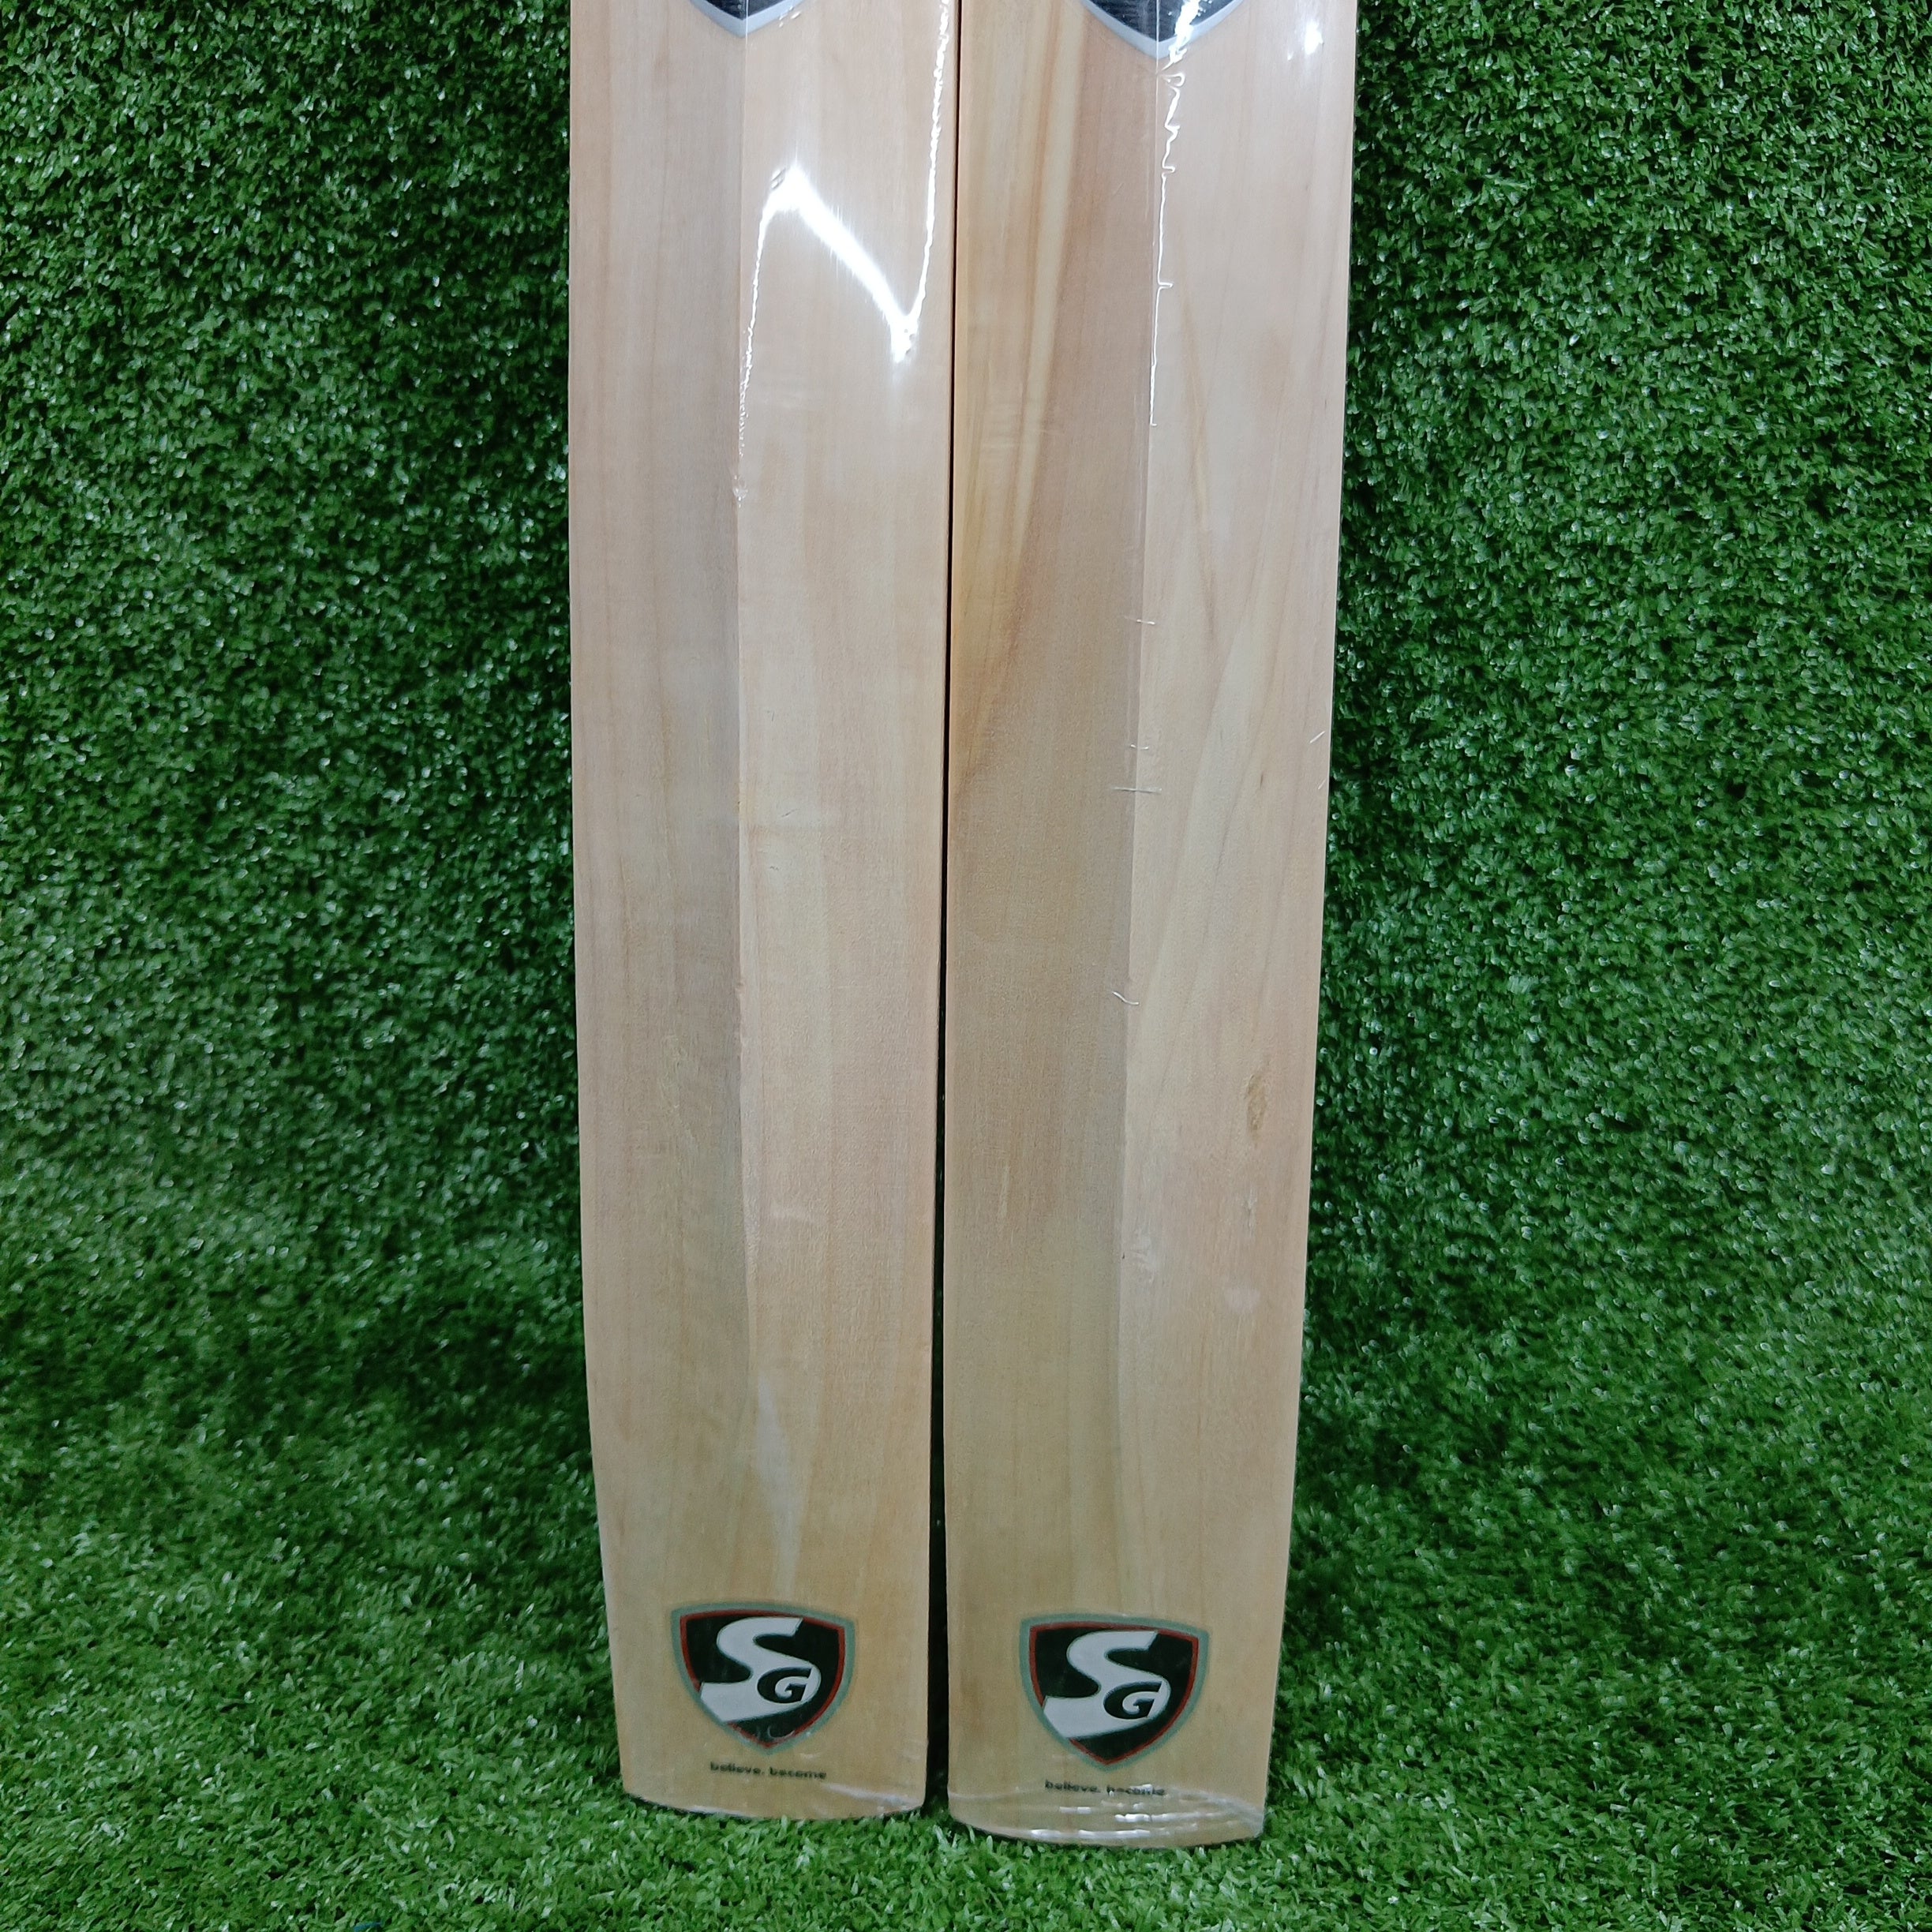 SG Middling Technical Leather Ball Cricket Practice Bat (iBat)